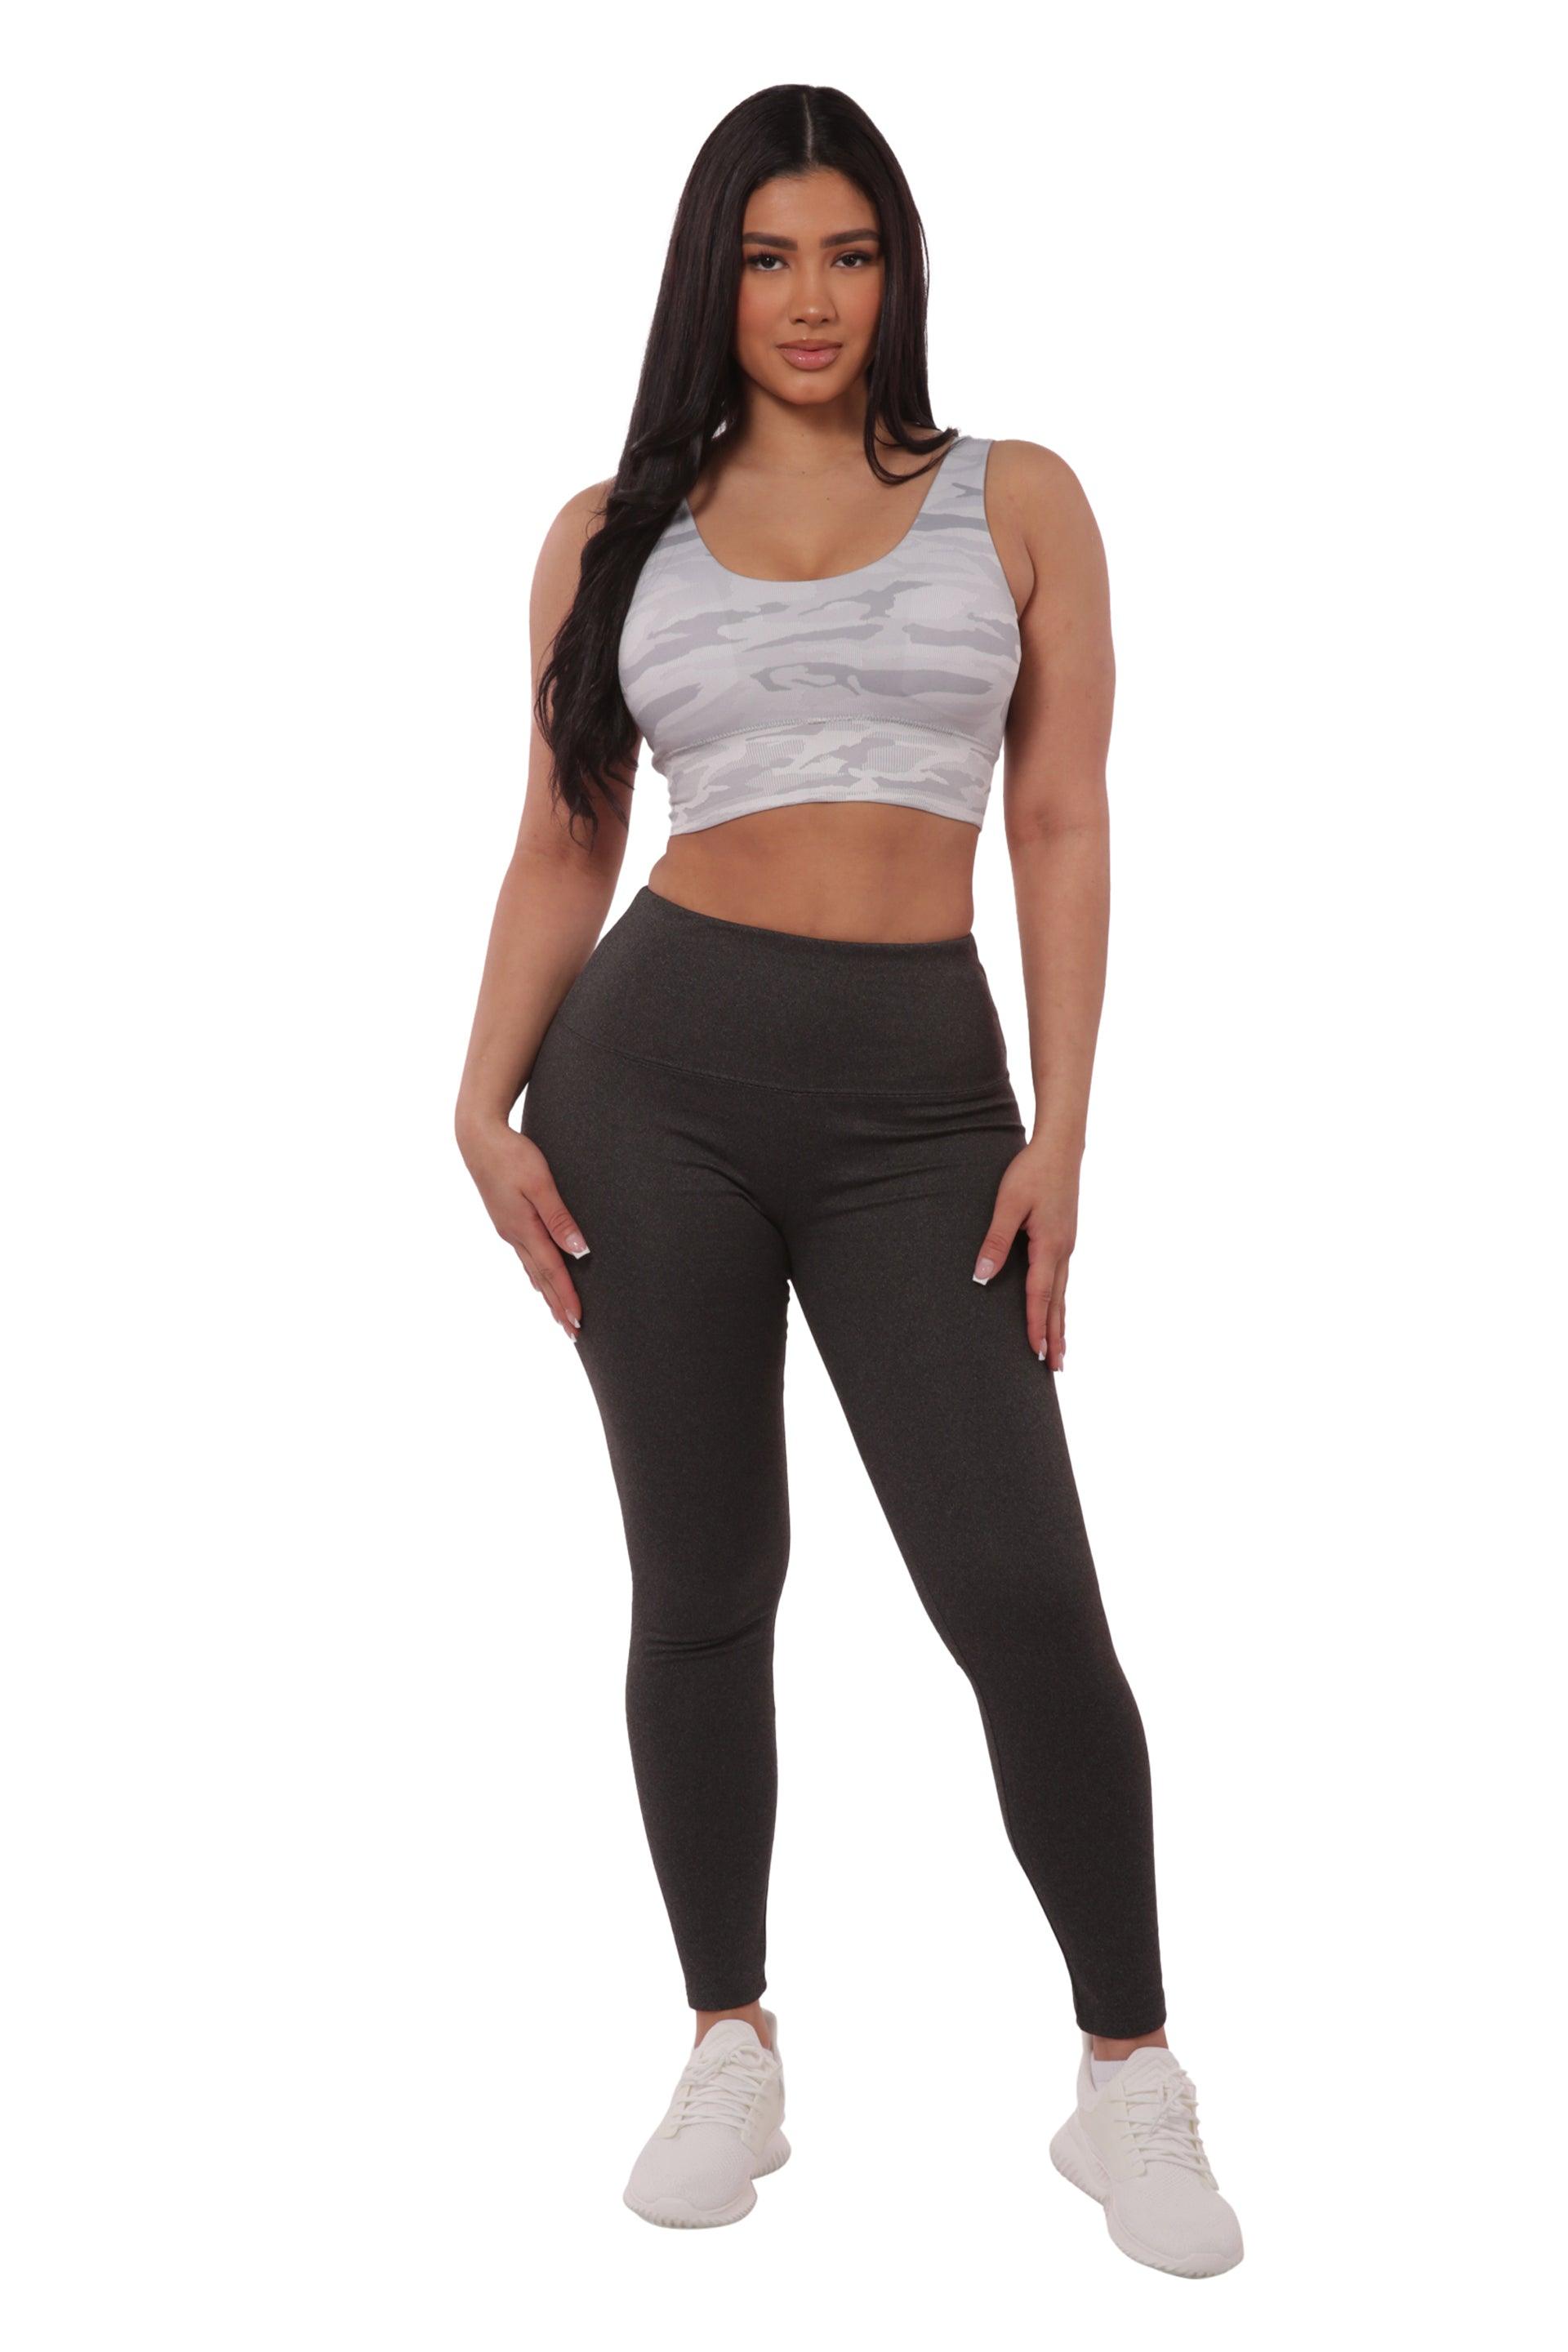 ShoSho Womens 2 Piece Sets Workout Outfit Sports Tops and Matching Butt  Sculpting Yoga Leggings Tummy Control High Waist Pants Space Dye Print  Black/White Small at  Women's Clothing store